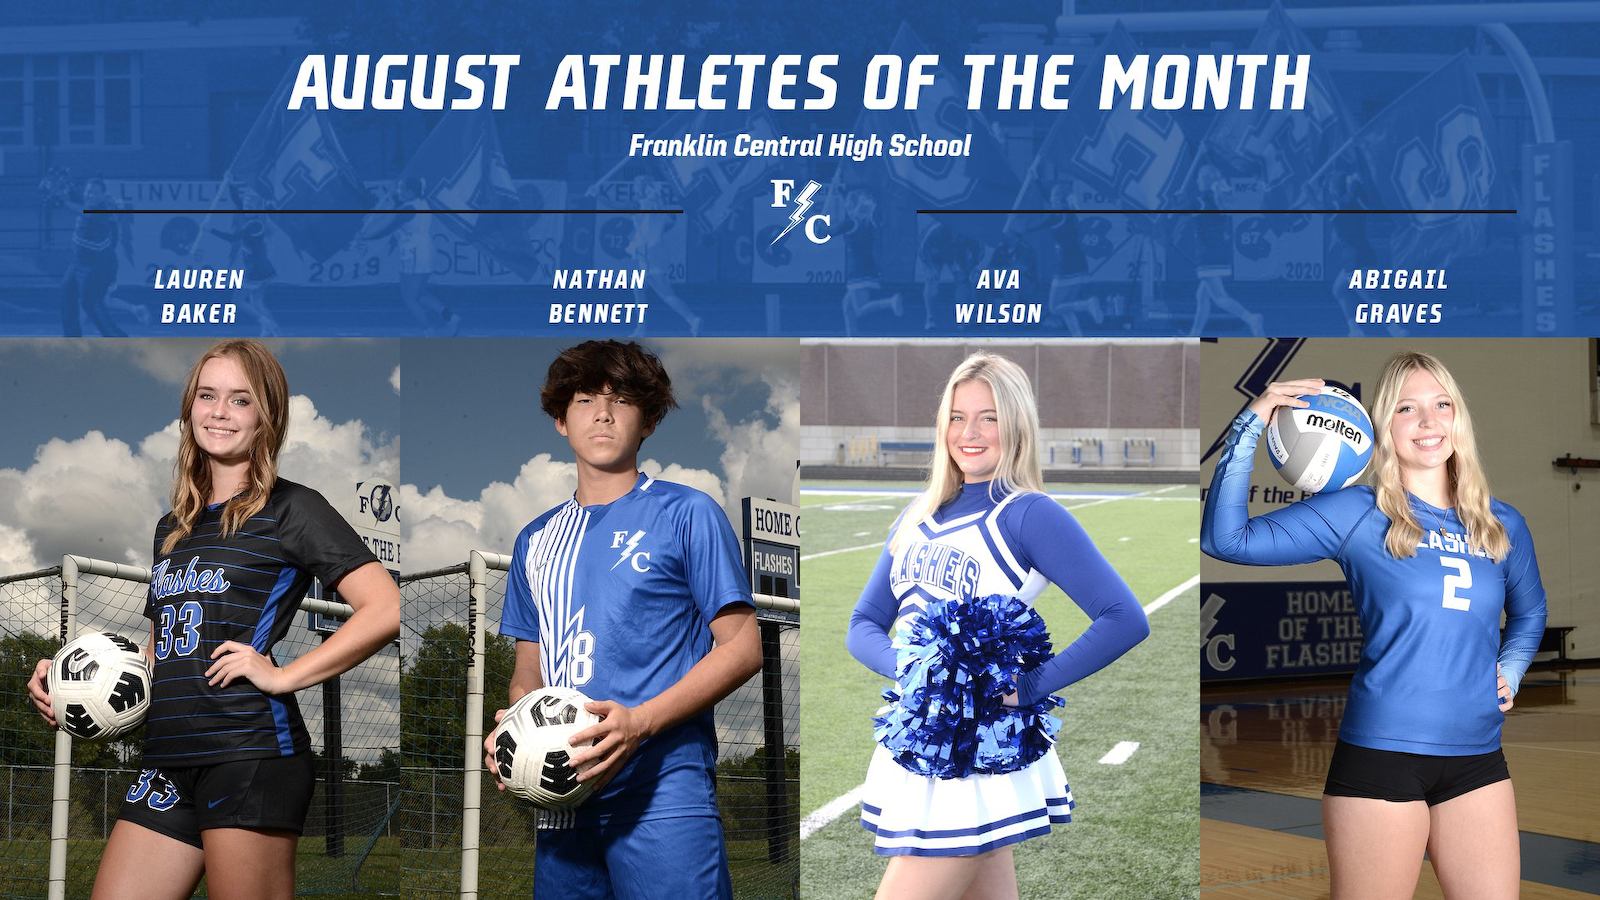 August Athletes of The Month cover photo